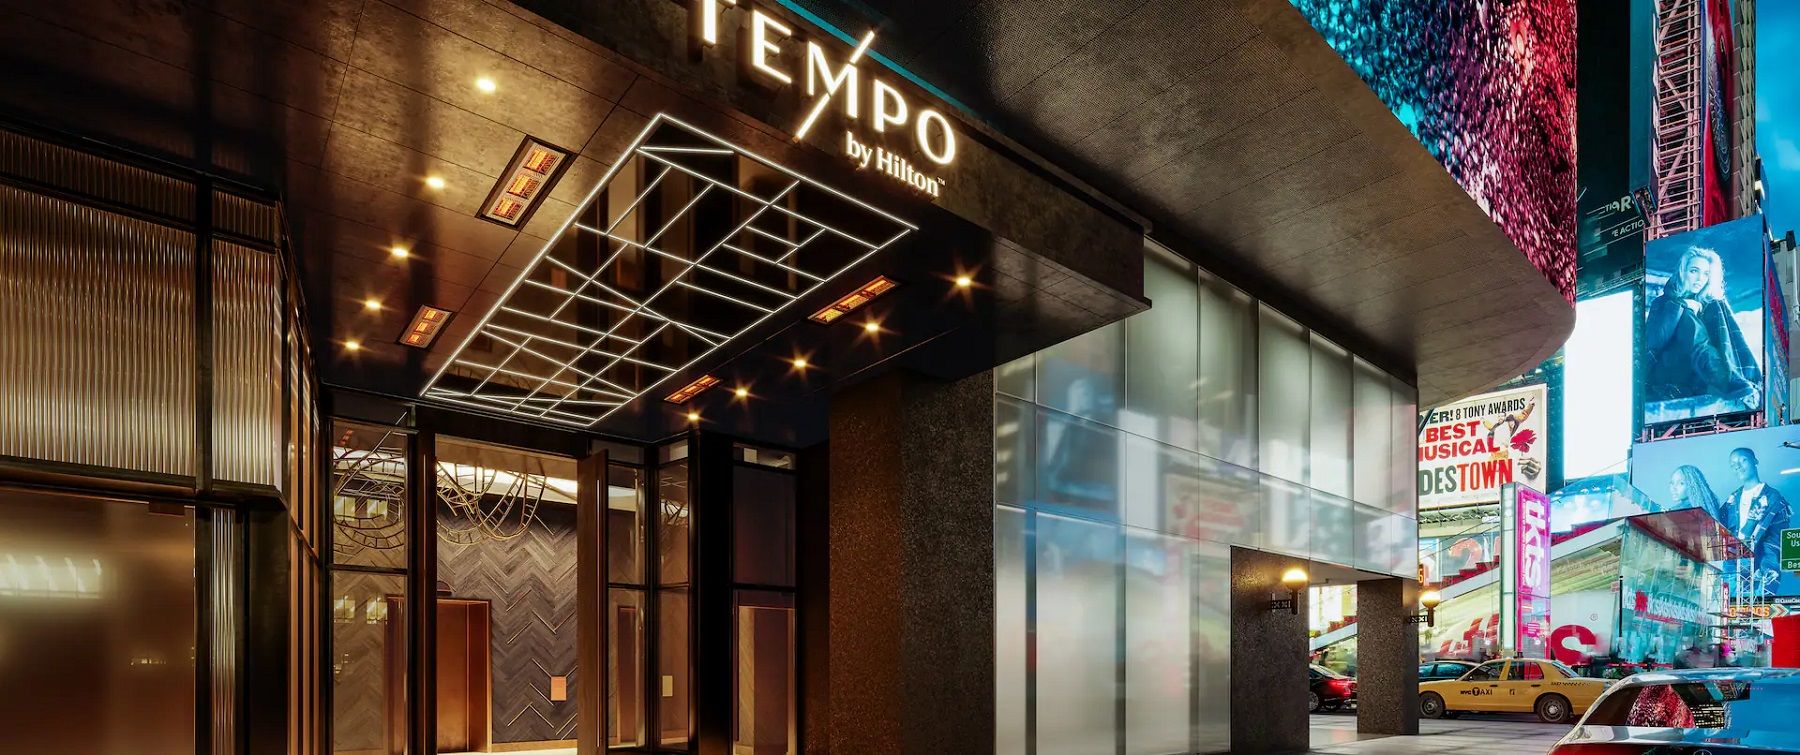 Tempo by Hilton New York Times Square